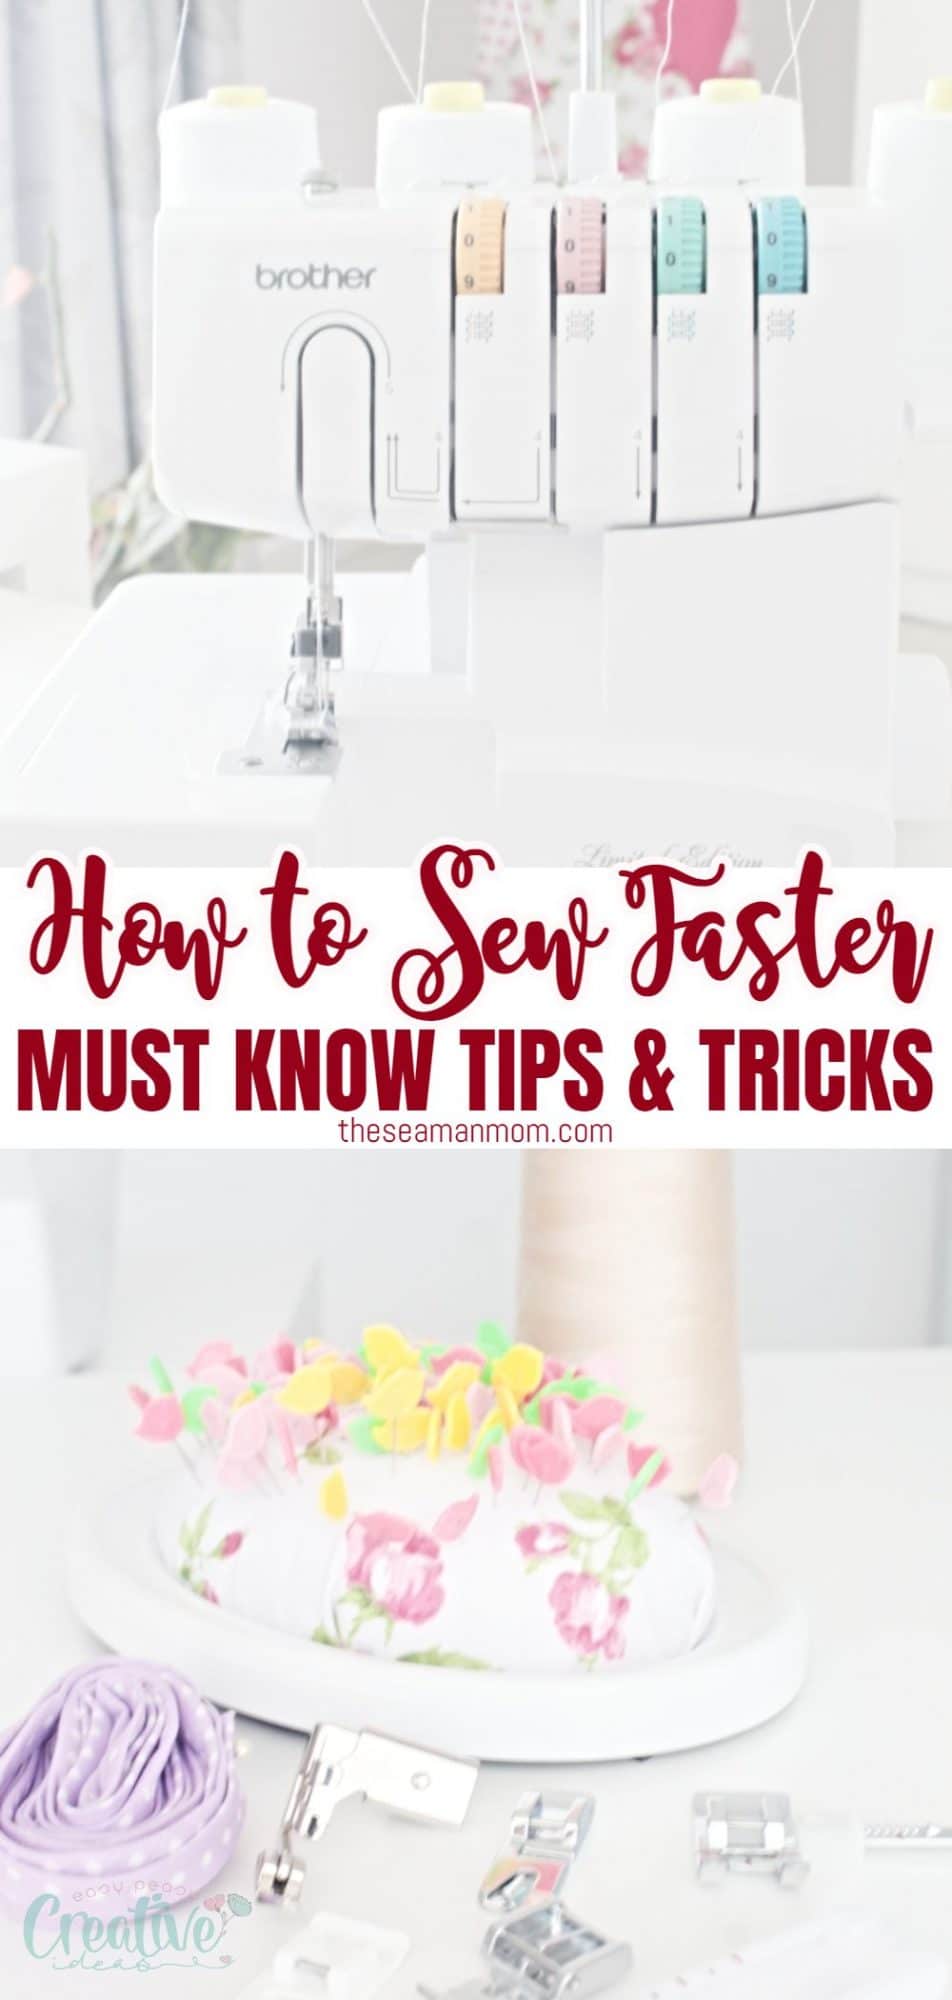 Sew faster tips and tricks for better sewing